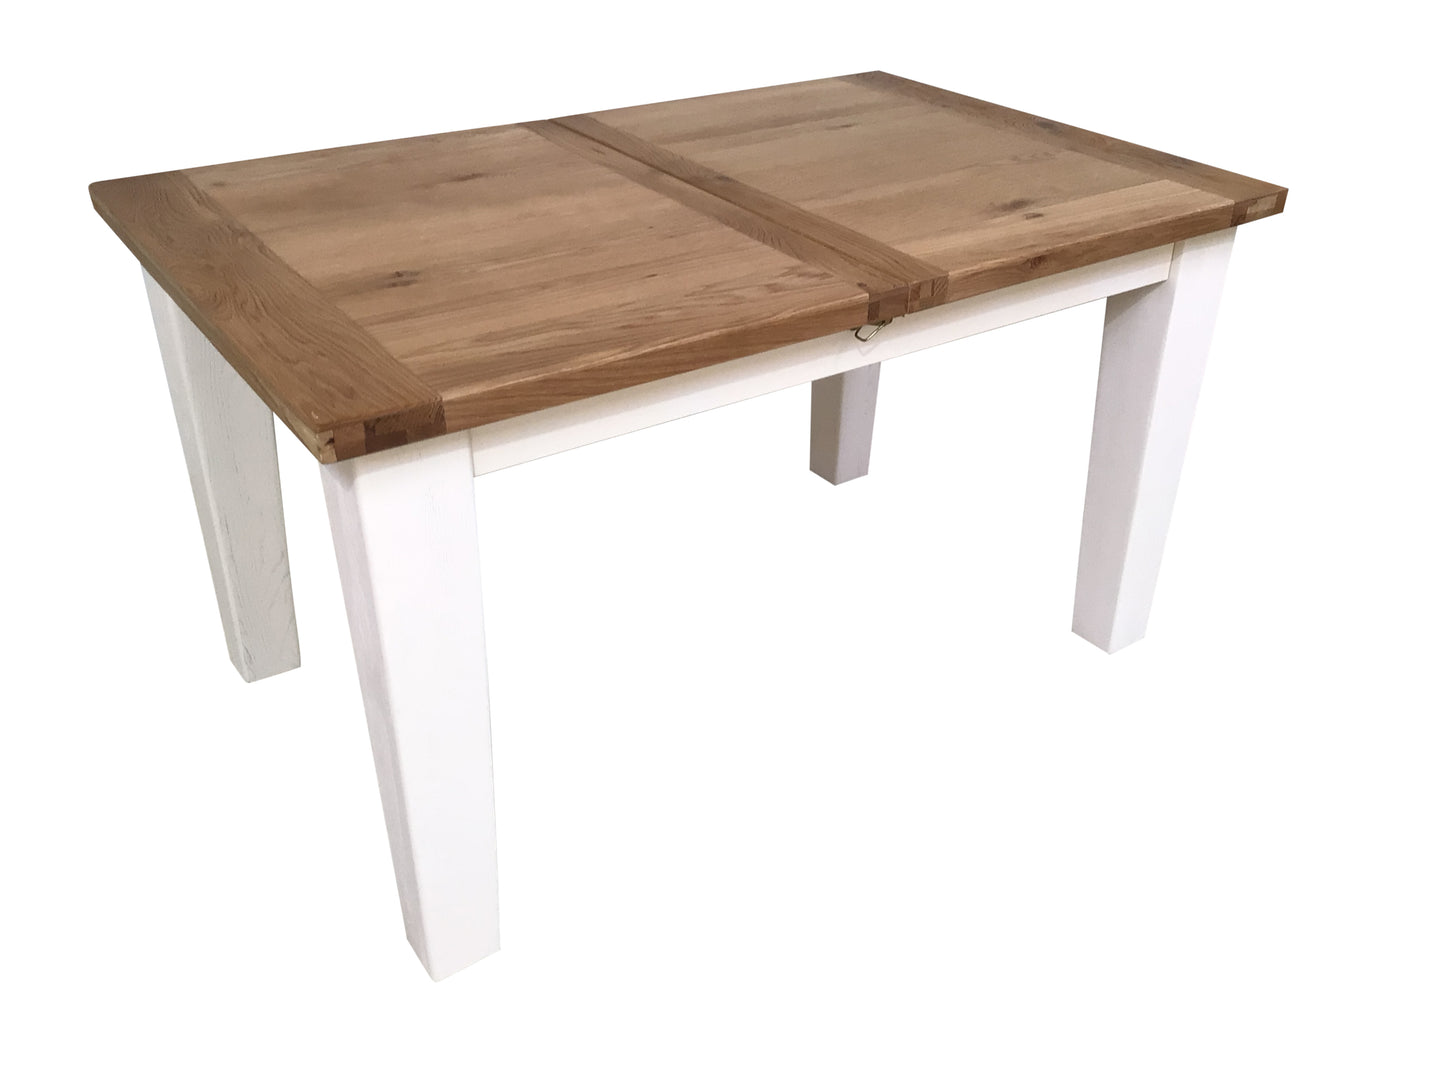 Calgary Oak 1.4m Ext Dining Set painted Off-White